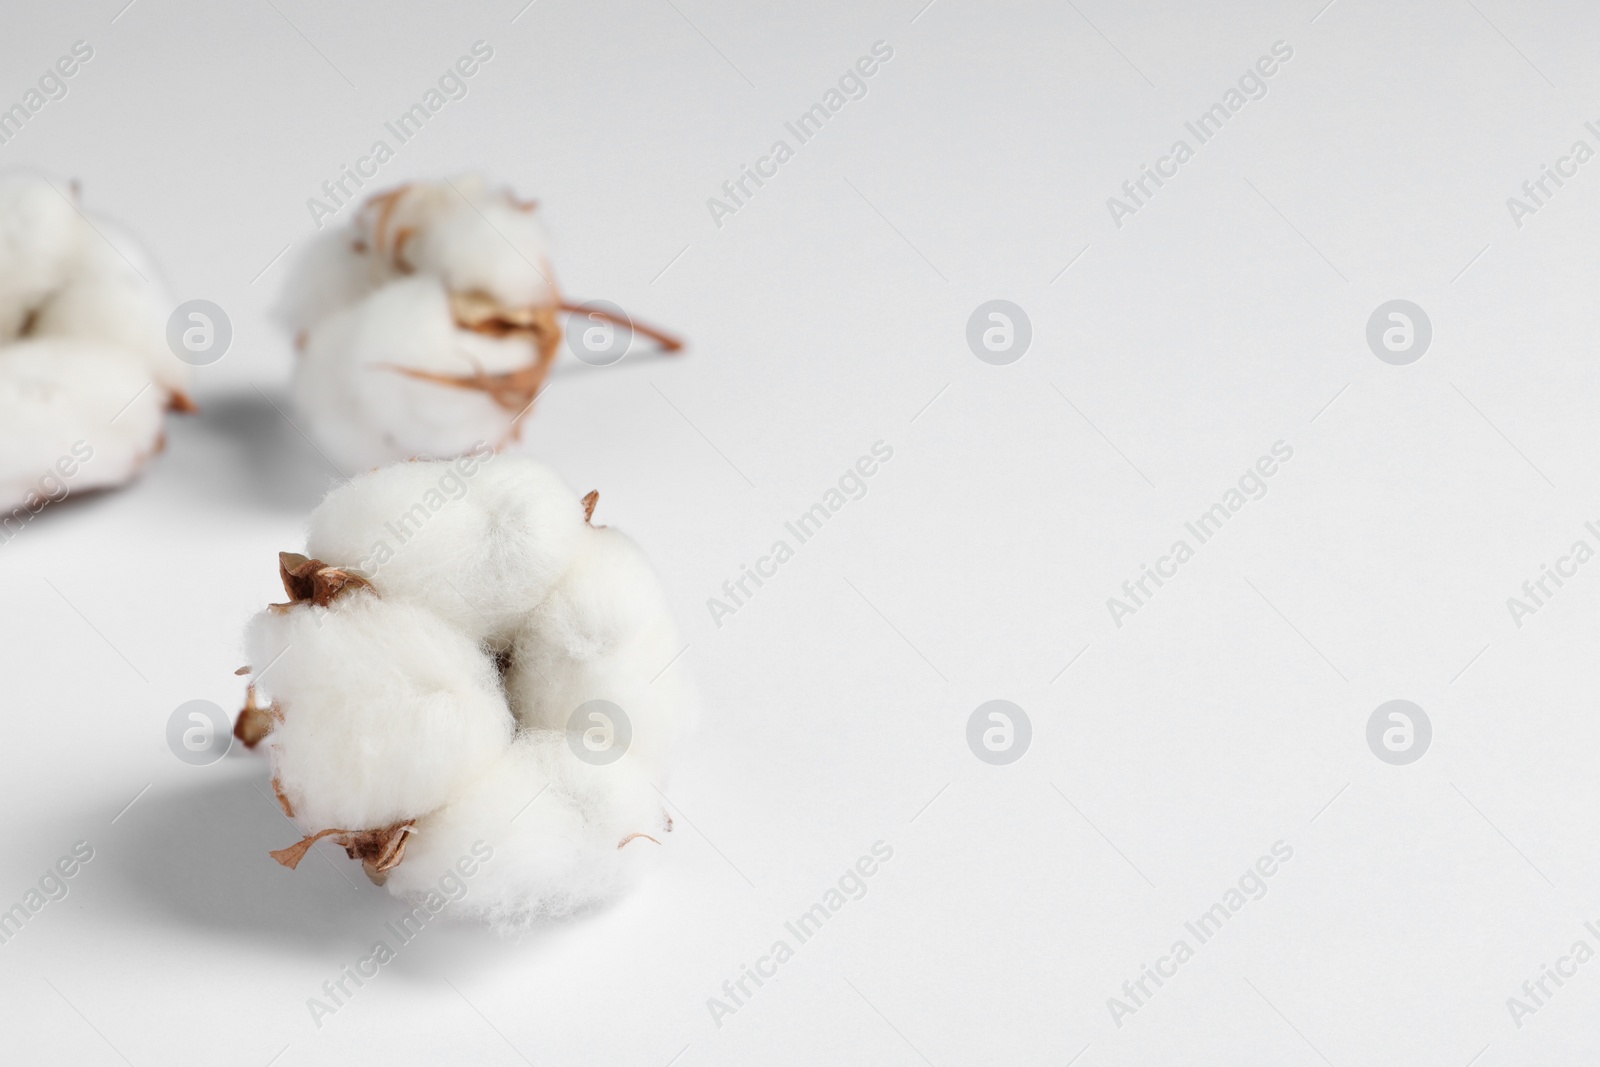 Photo of Cotton flowers on white fluffy background, closeup. Space for text